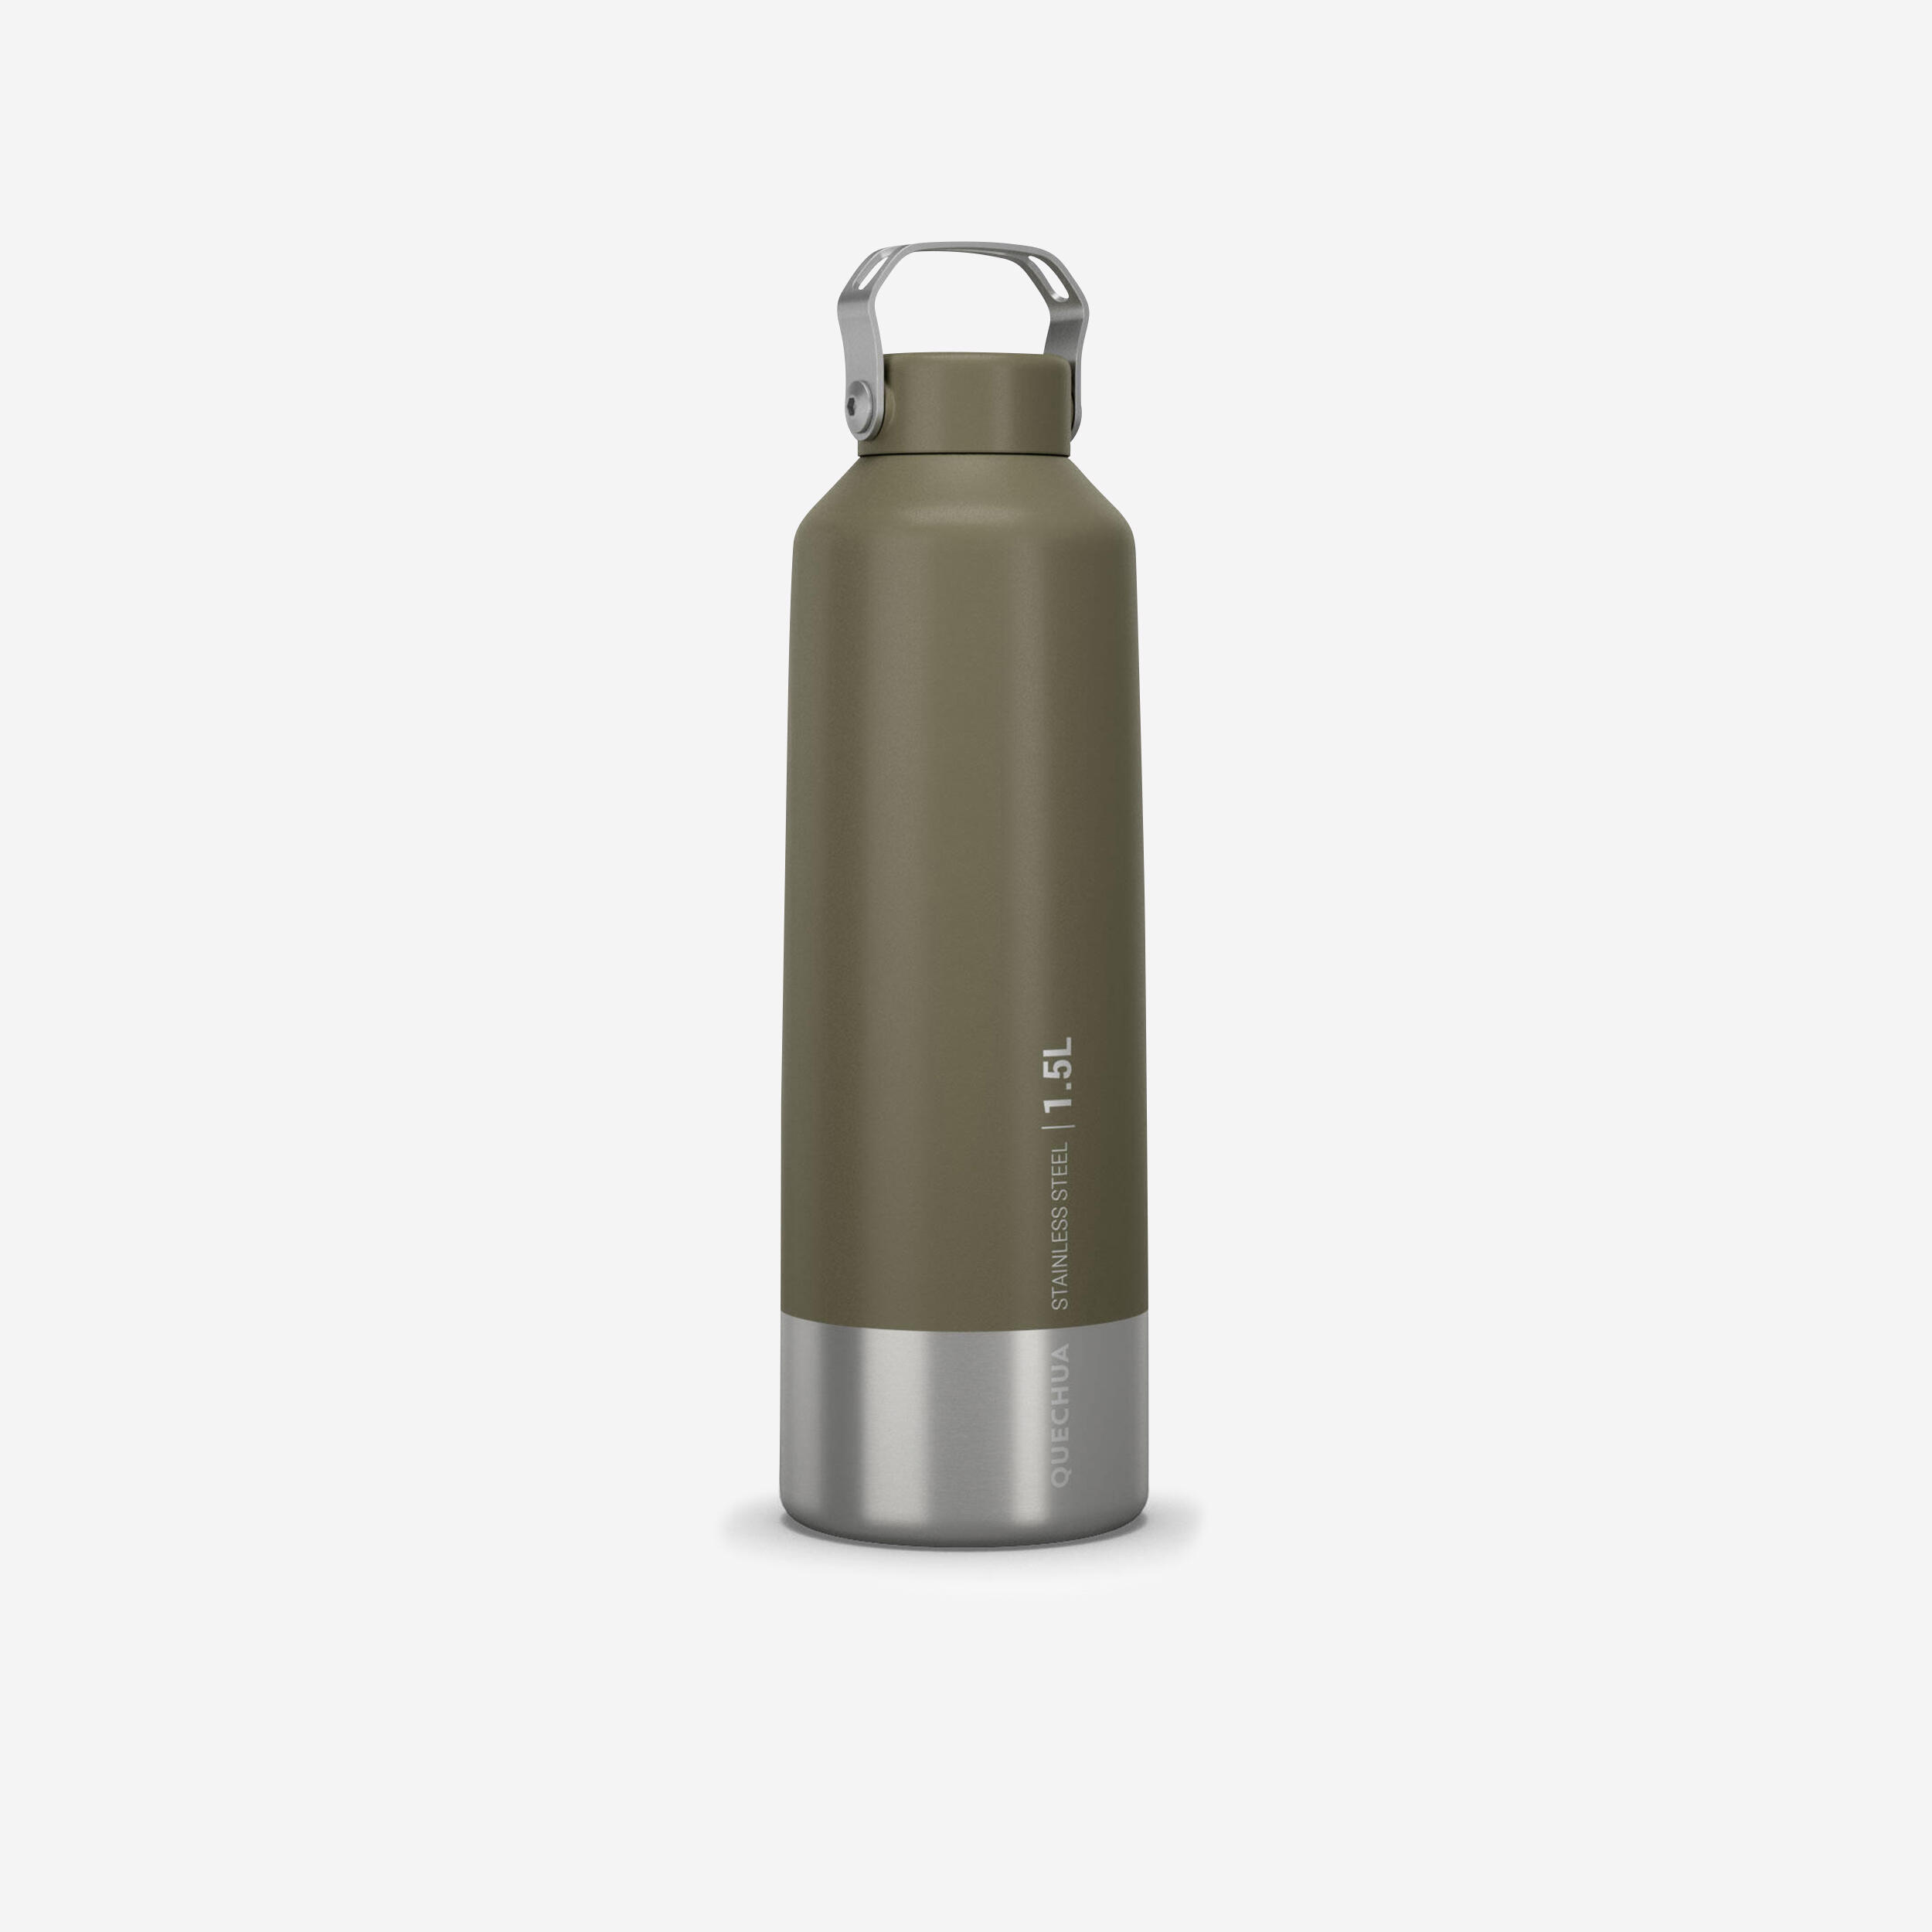 QUECHUA 1.5 L stainless steel flask with screw cap for hiking - Khaki